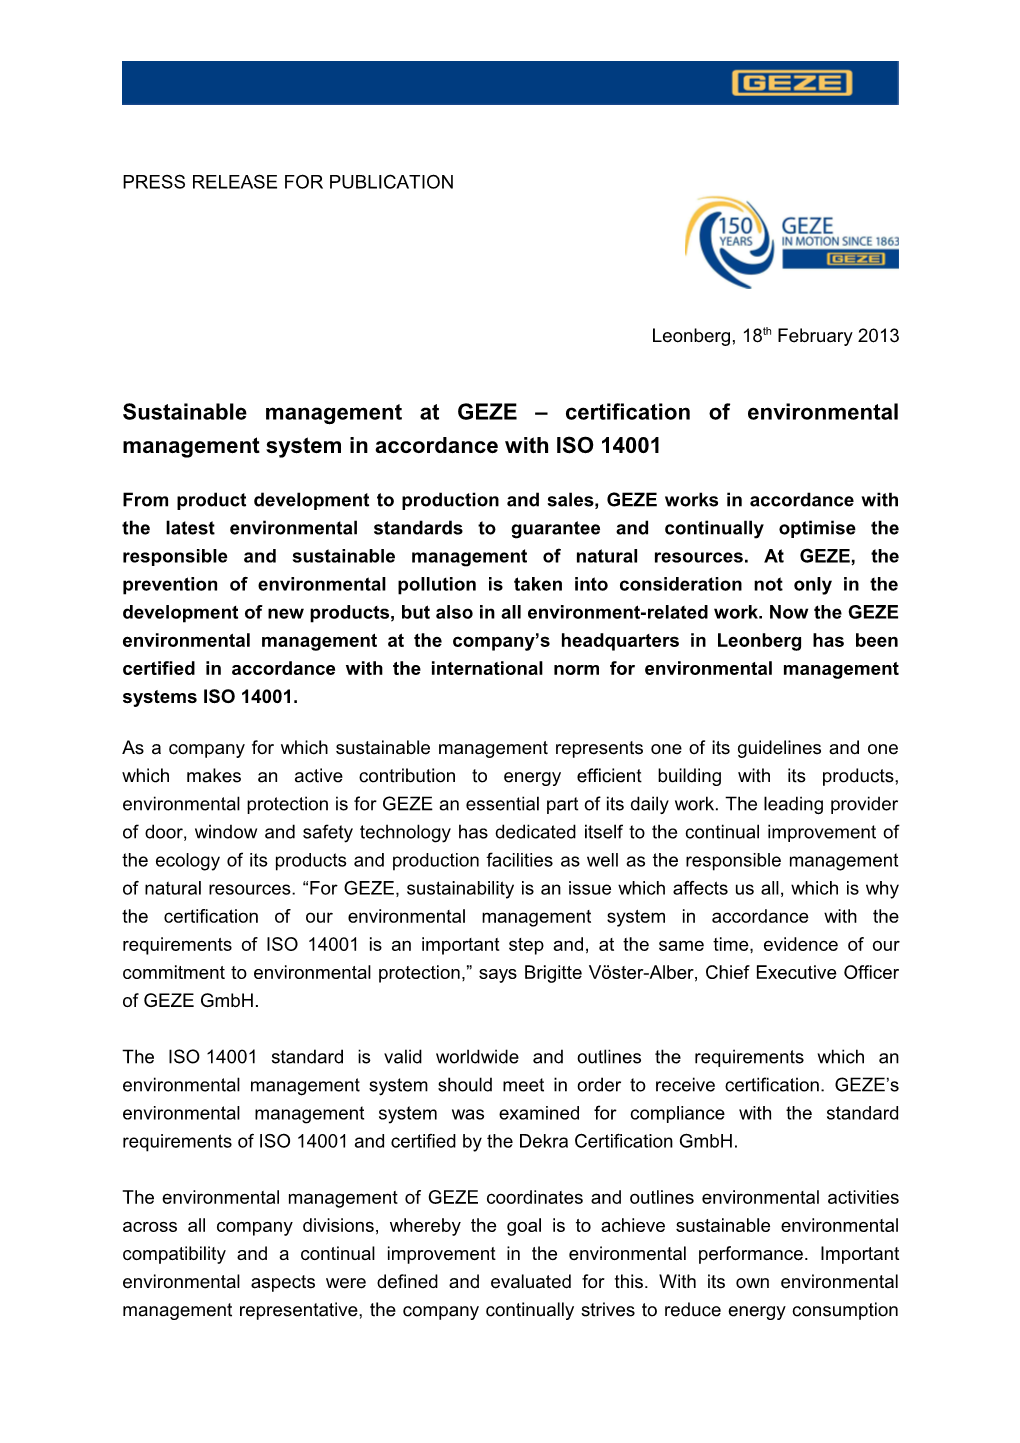 Sustainable Management at GEZE Certification of Environmental Management System in Accordance